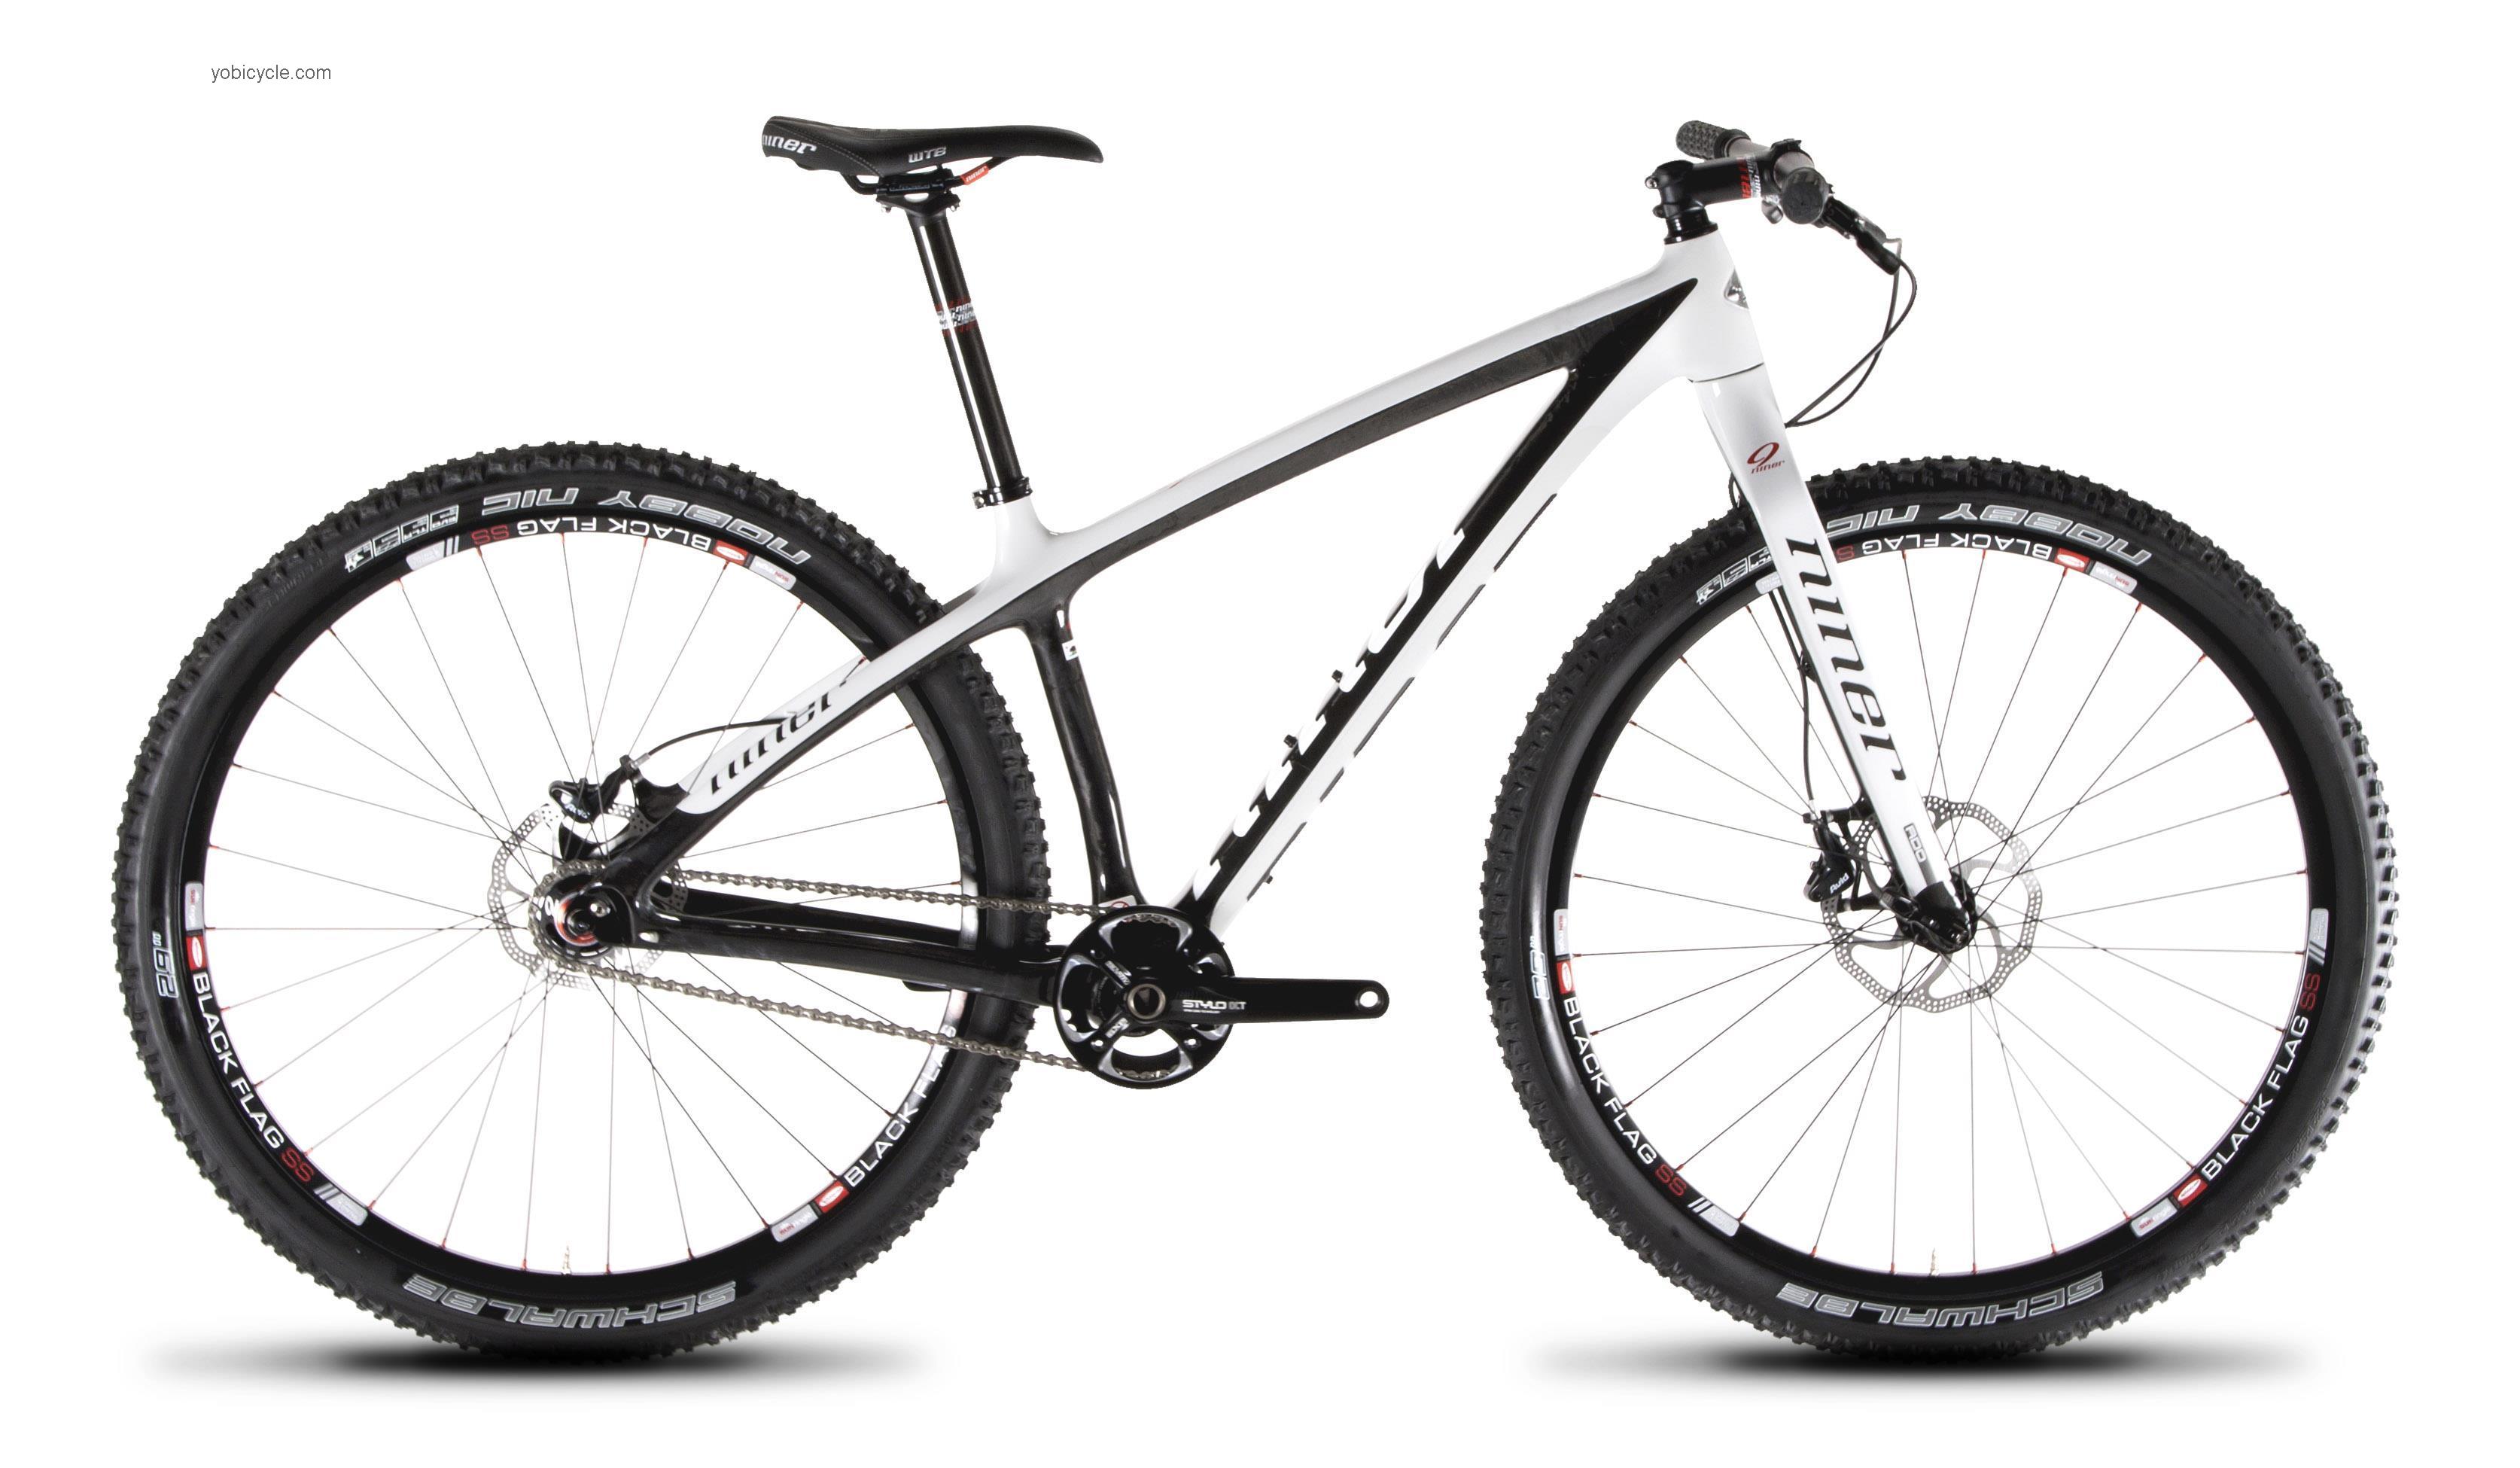 Niner Air 9 Carbon competitors and comparison tool online specs and performance